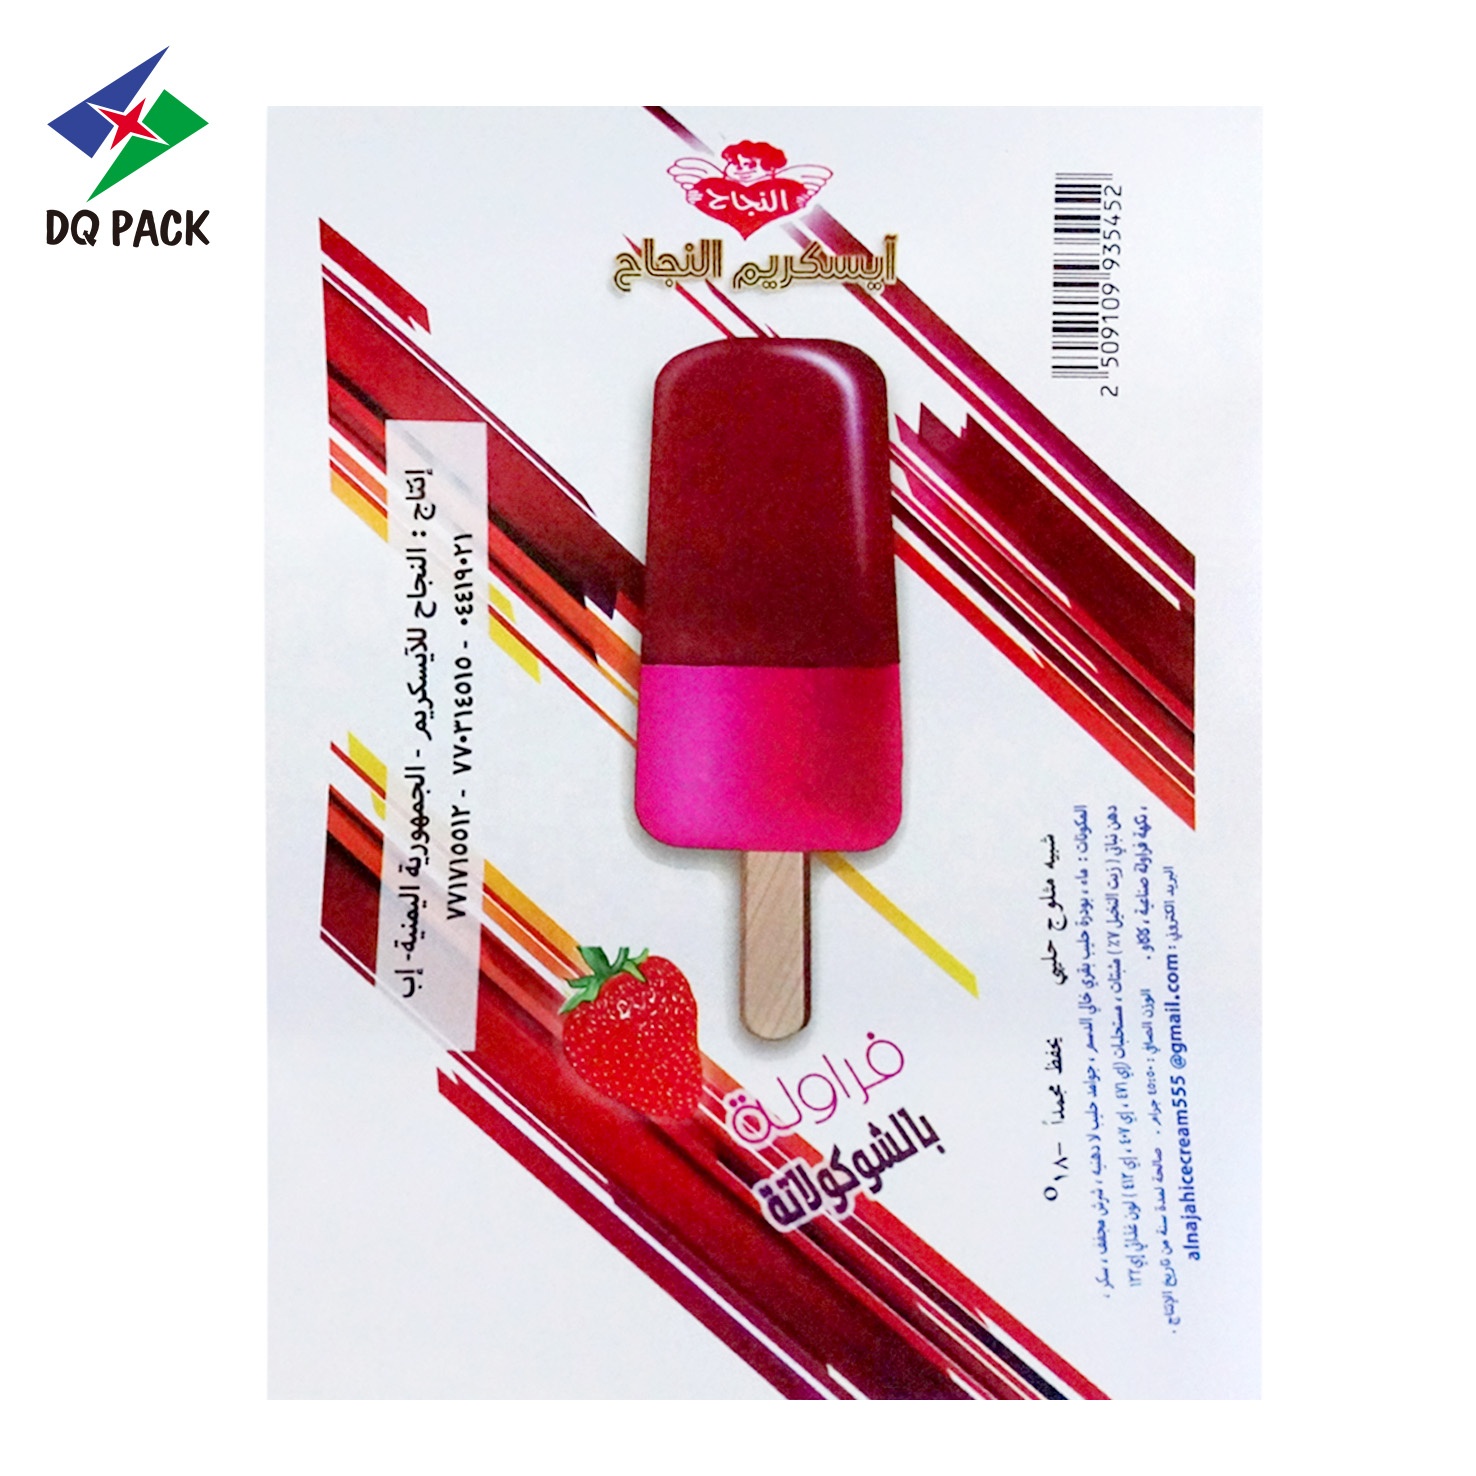 China DQ PACK Custom Packaging Plastic Roll Stock Ice Cream Film Ice Lolly Roll Film